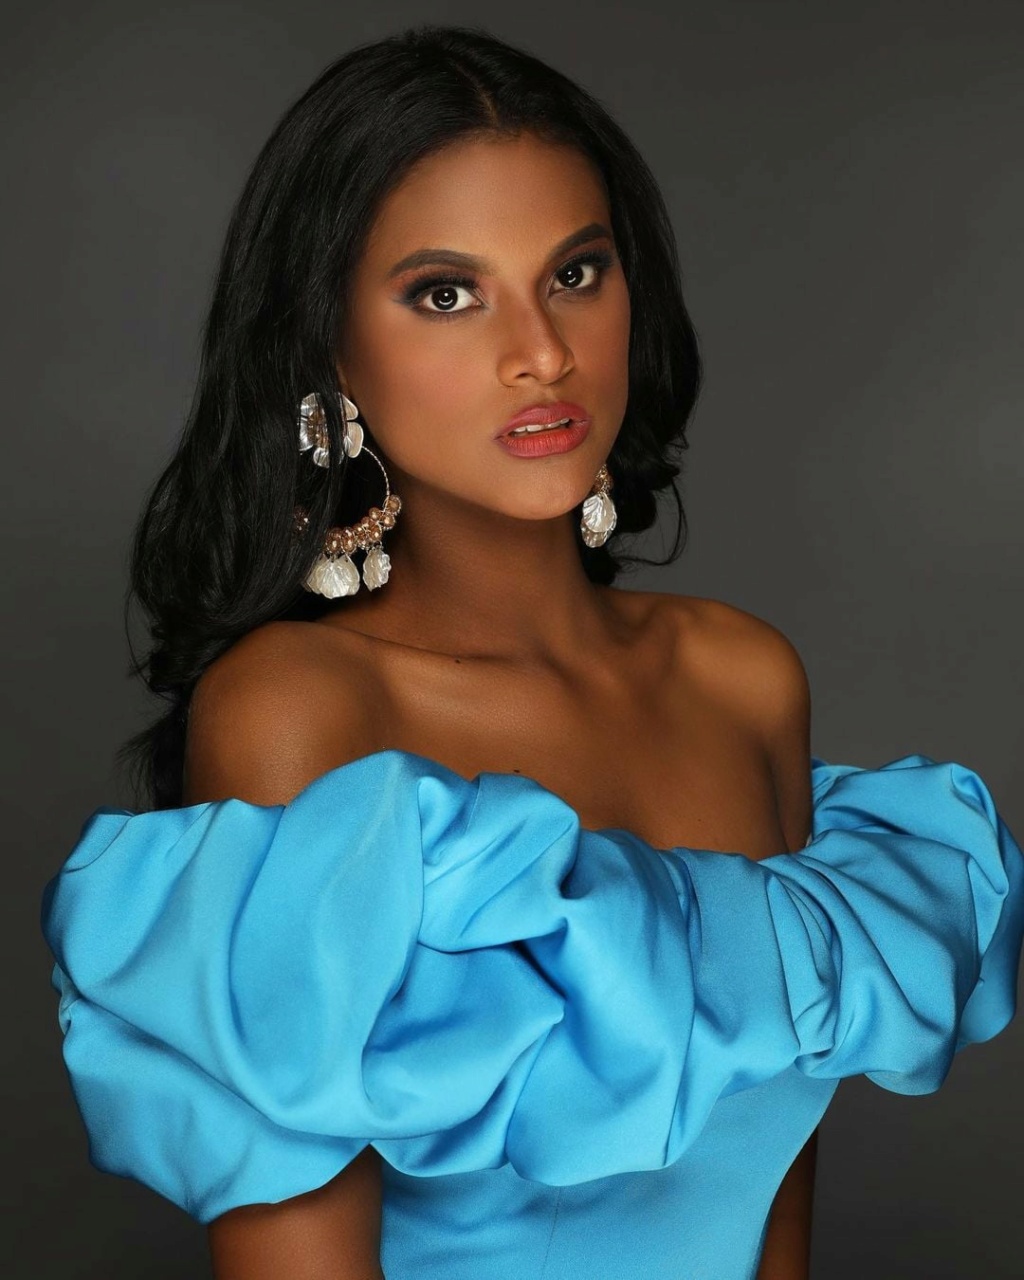 MISS WORLD 2021: OFFICIAL PORTRAITS 26776110